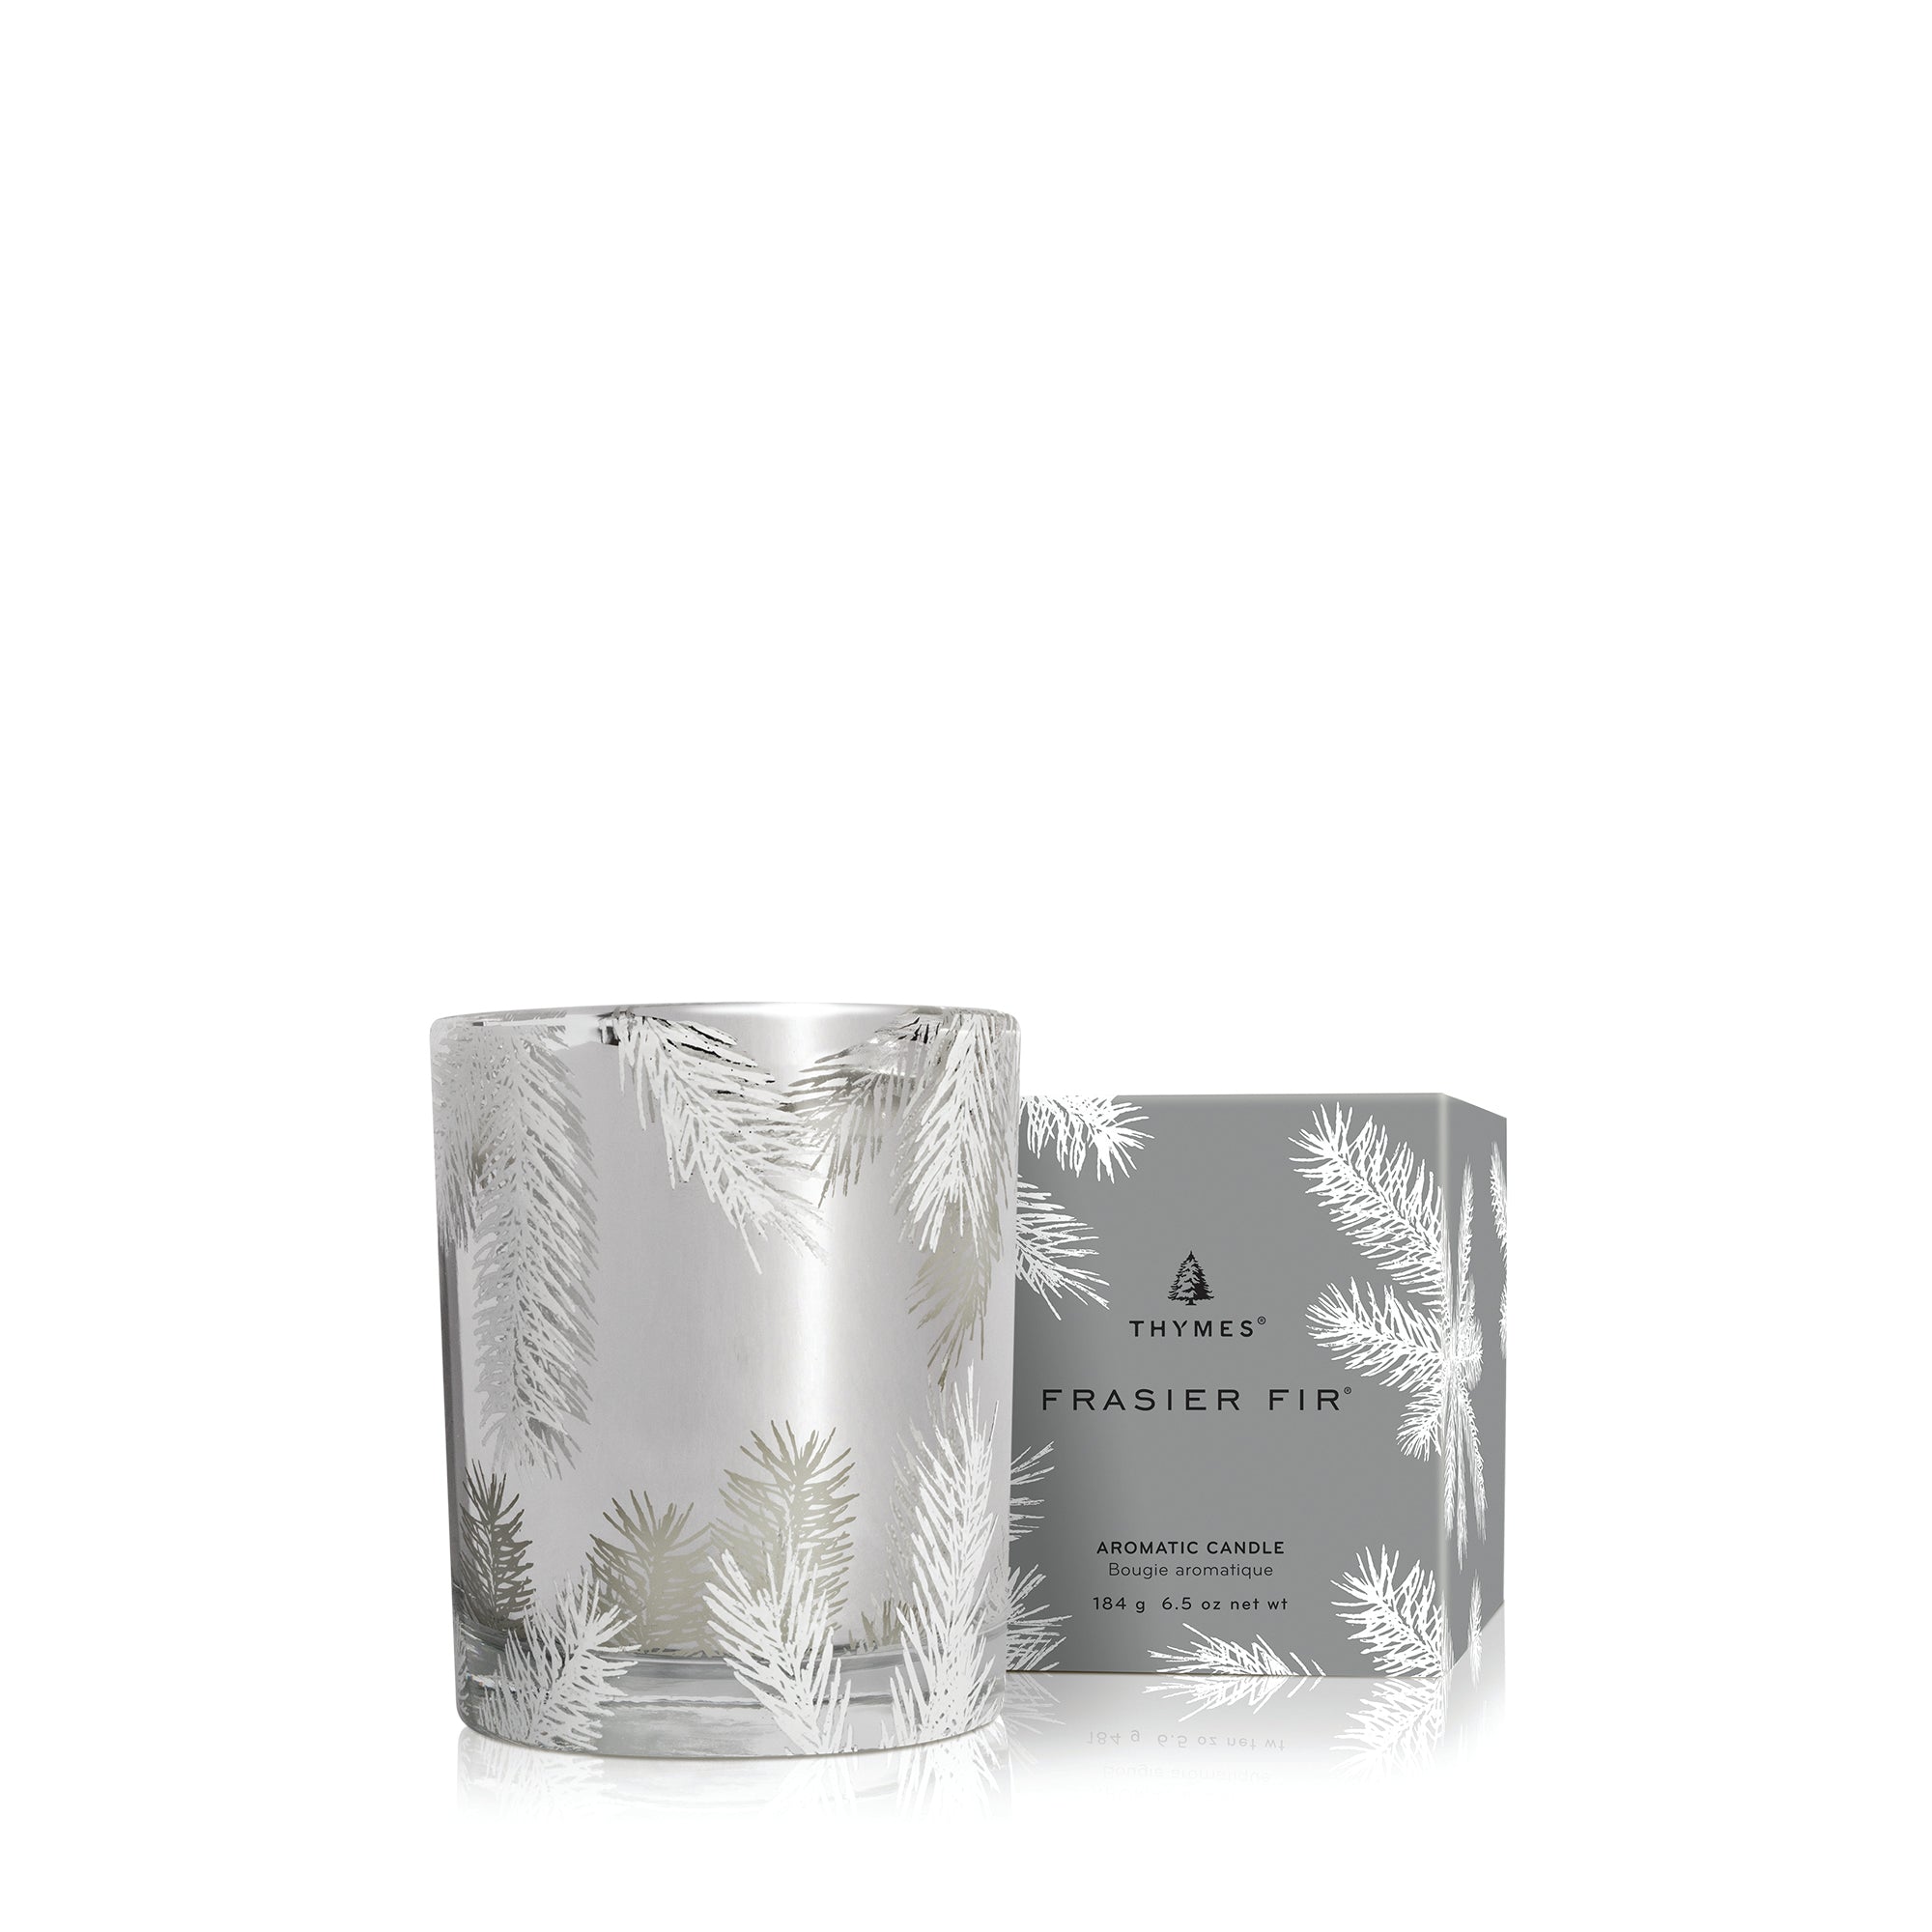 Thymes Frasier Fir Statement Poured Candle - 6.5 oz